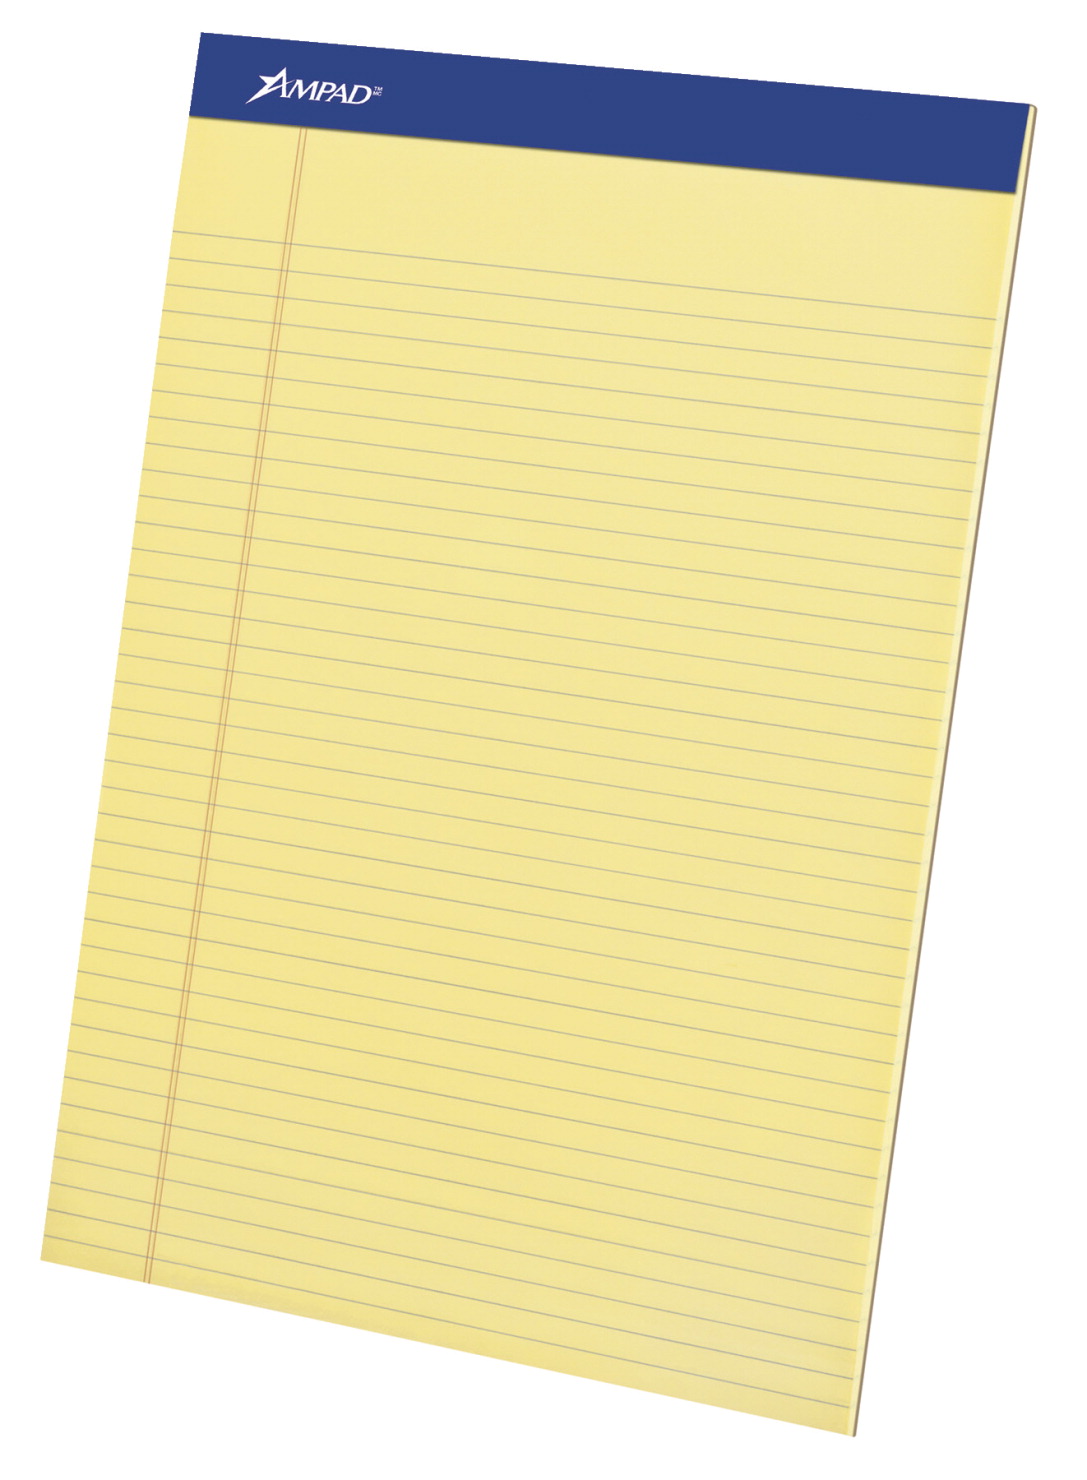 Ampad Writing Pad - 50 Sheets - Stapled - 0.25" Ruled - 15 lb Basis Weight - Letter - 8 1/2" x 11"8.5" x 11.8" - Canary Paper - 